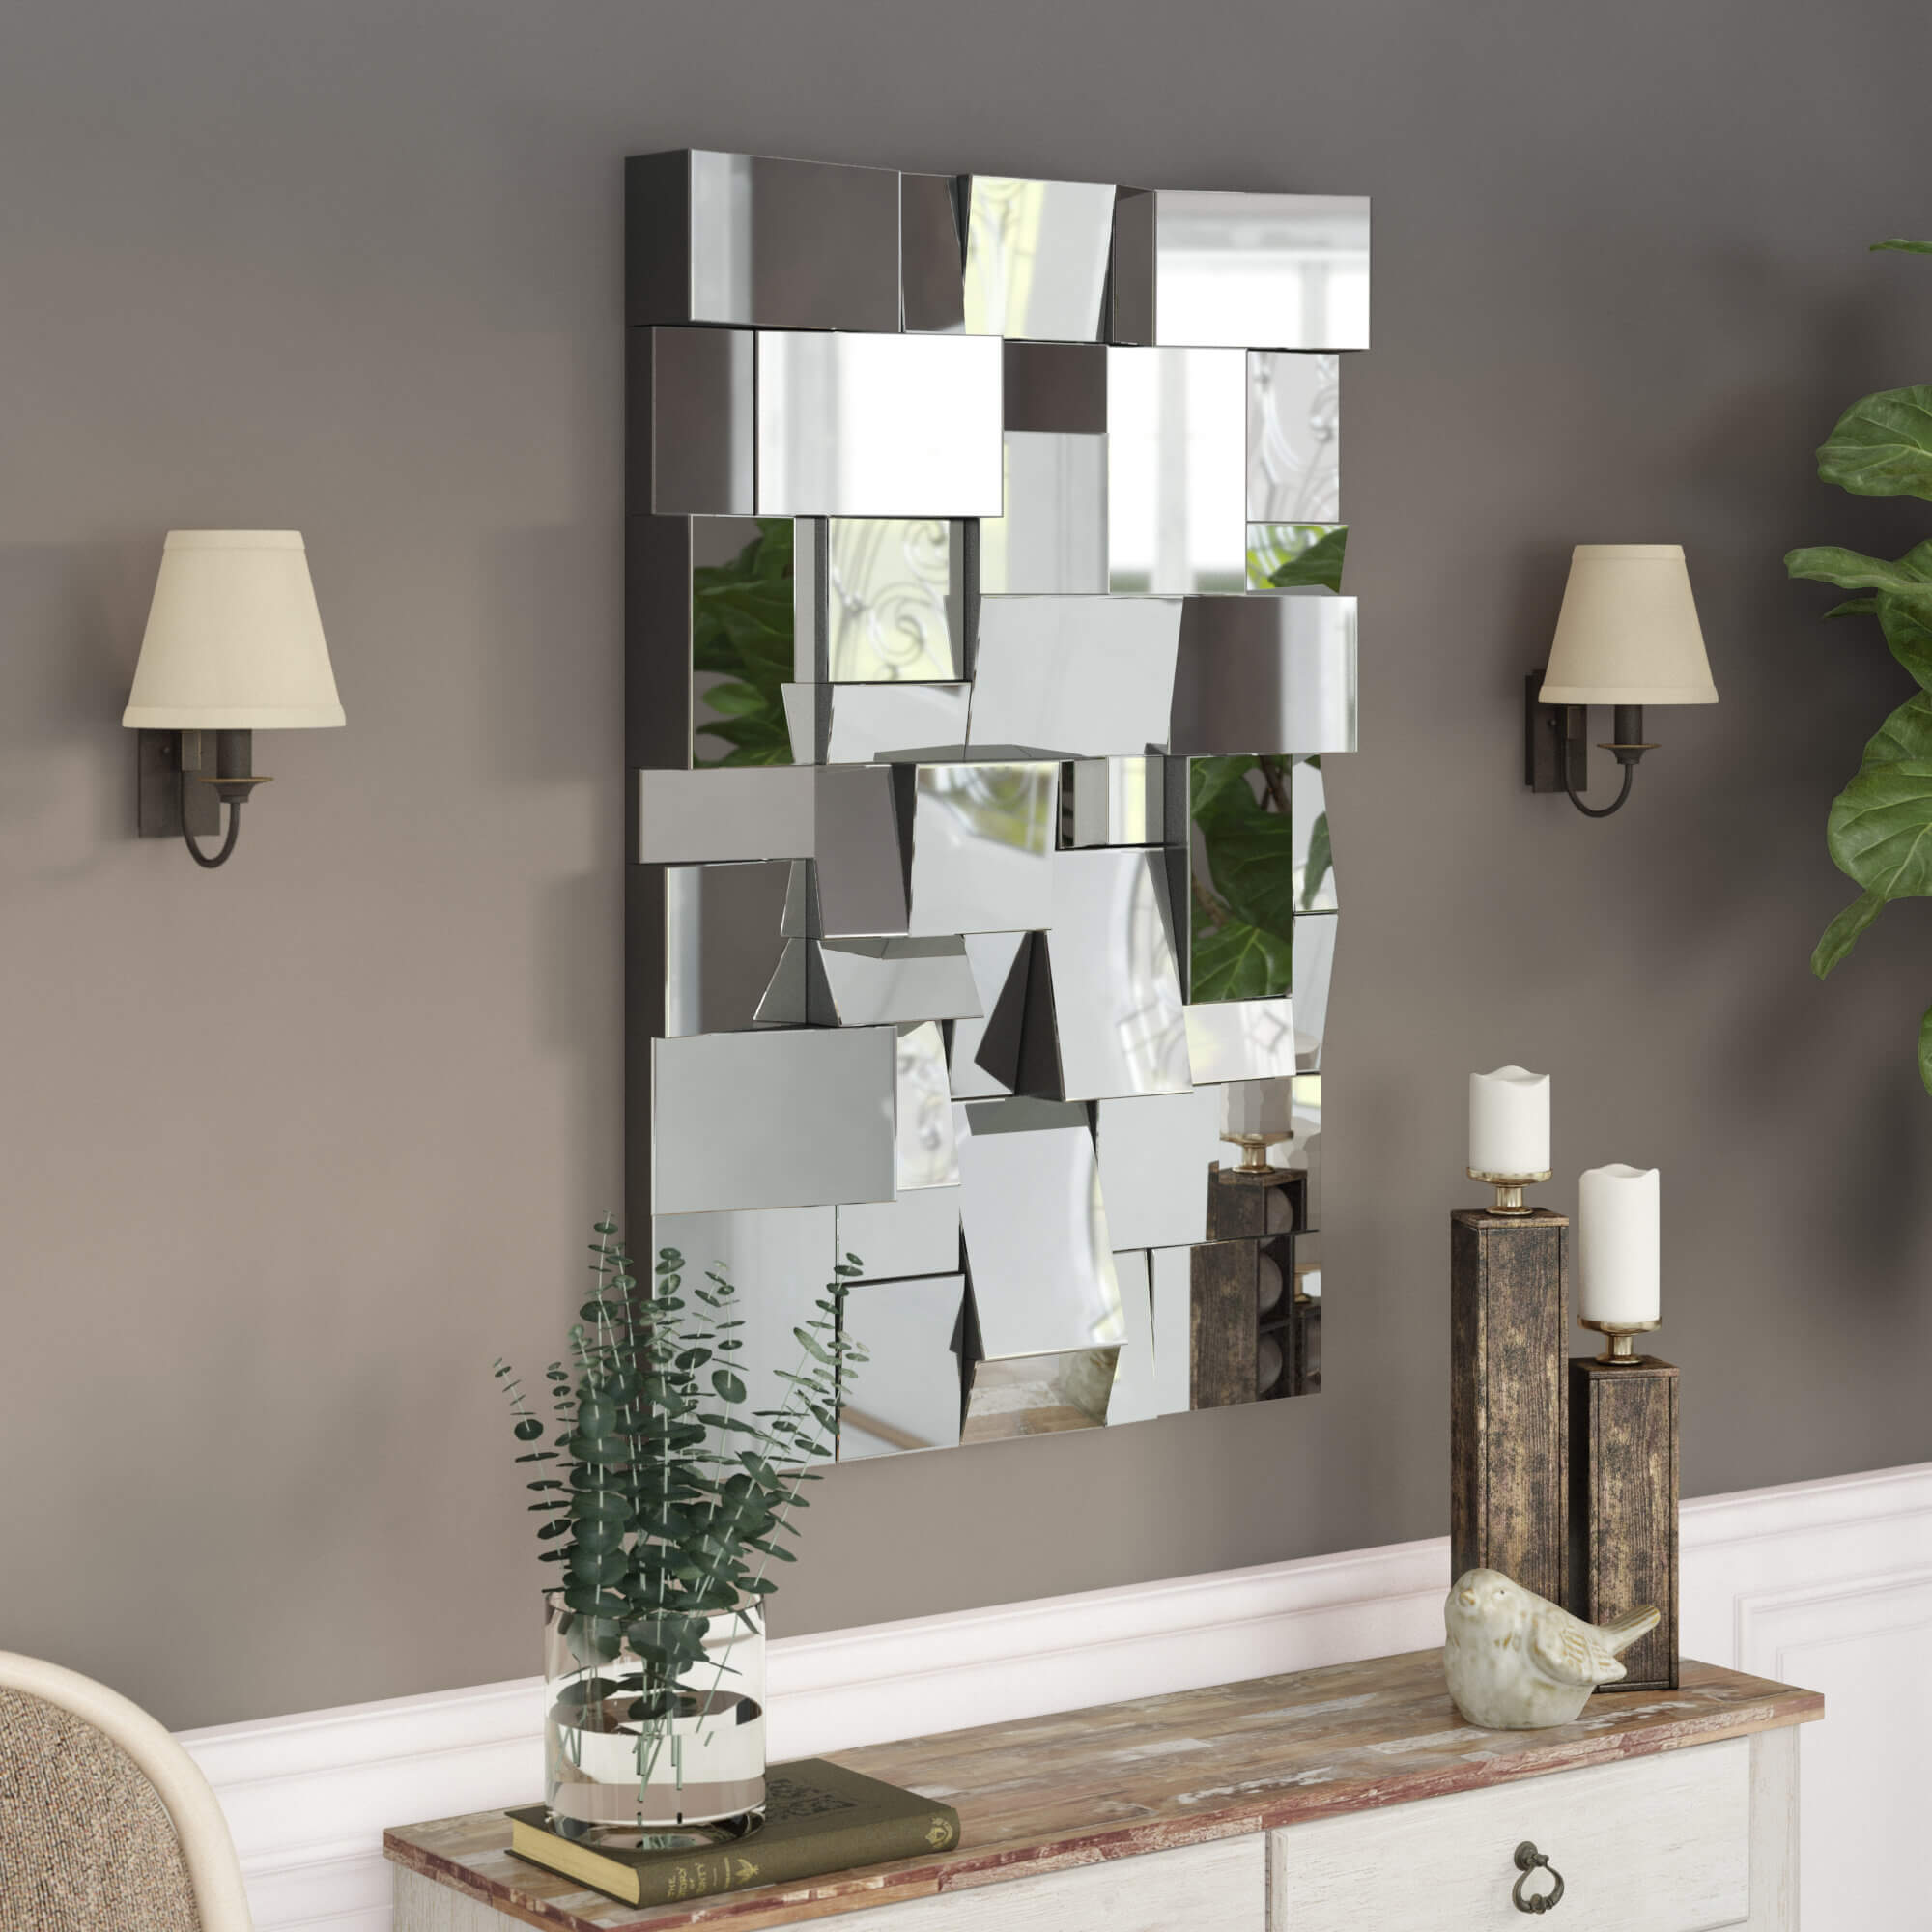 Check Out How to Get the Mirror Decoration Right 5